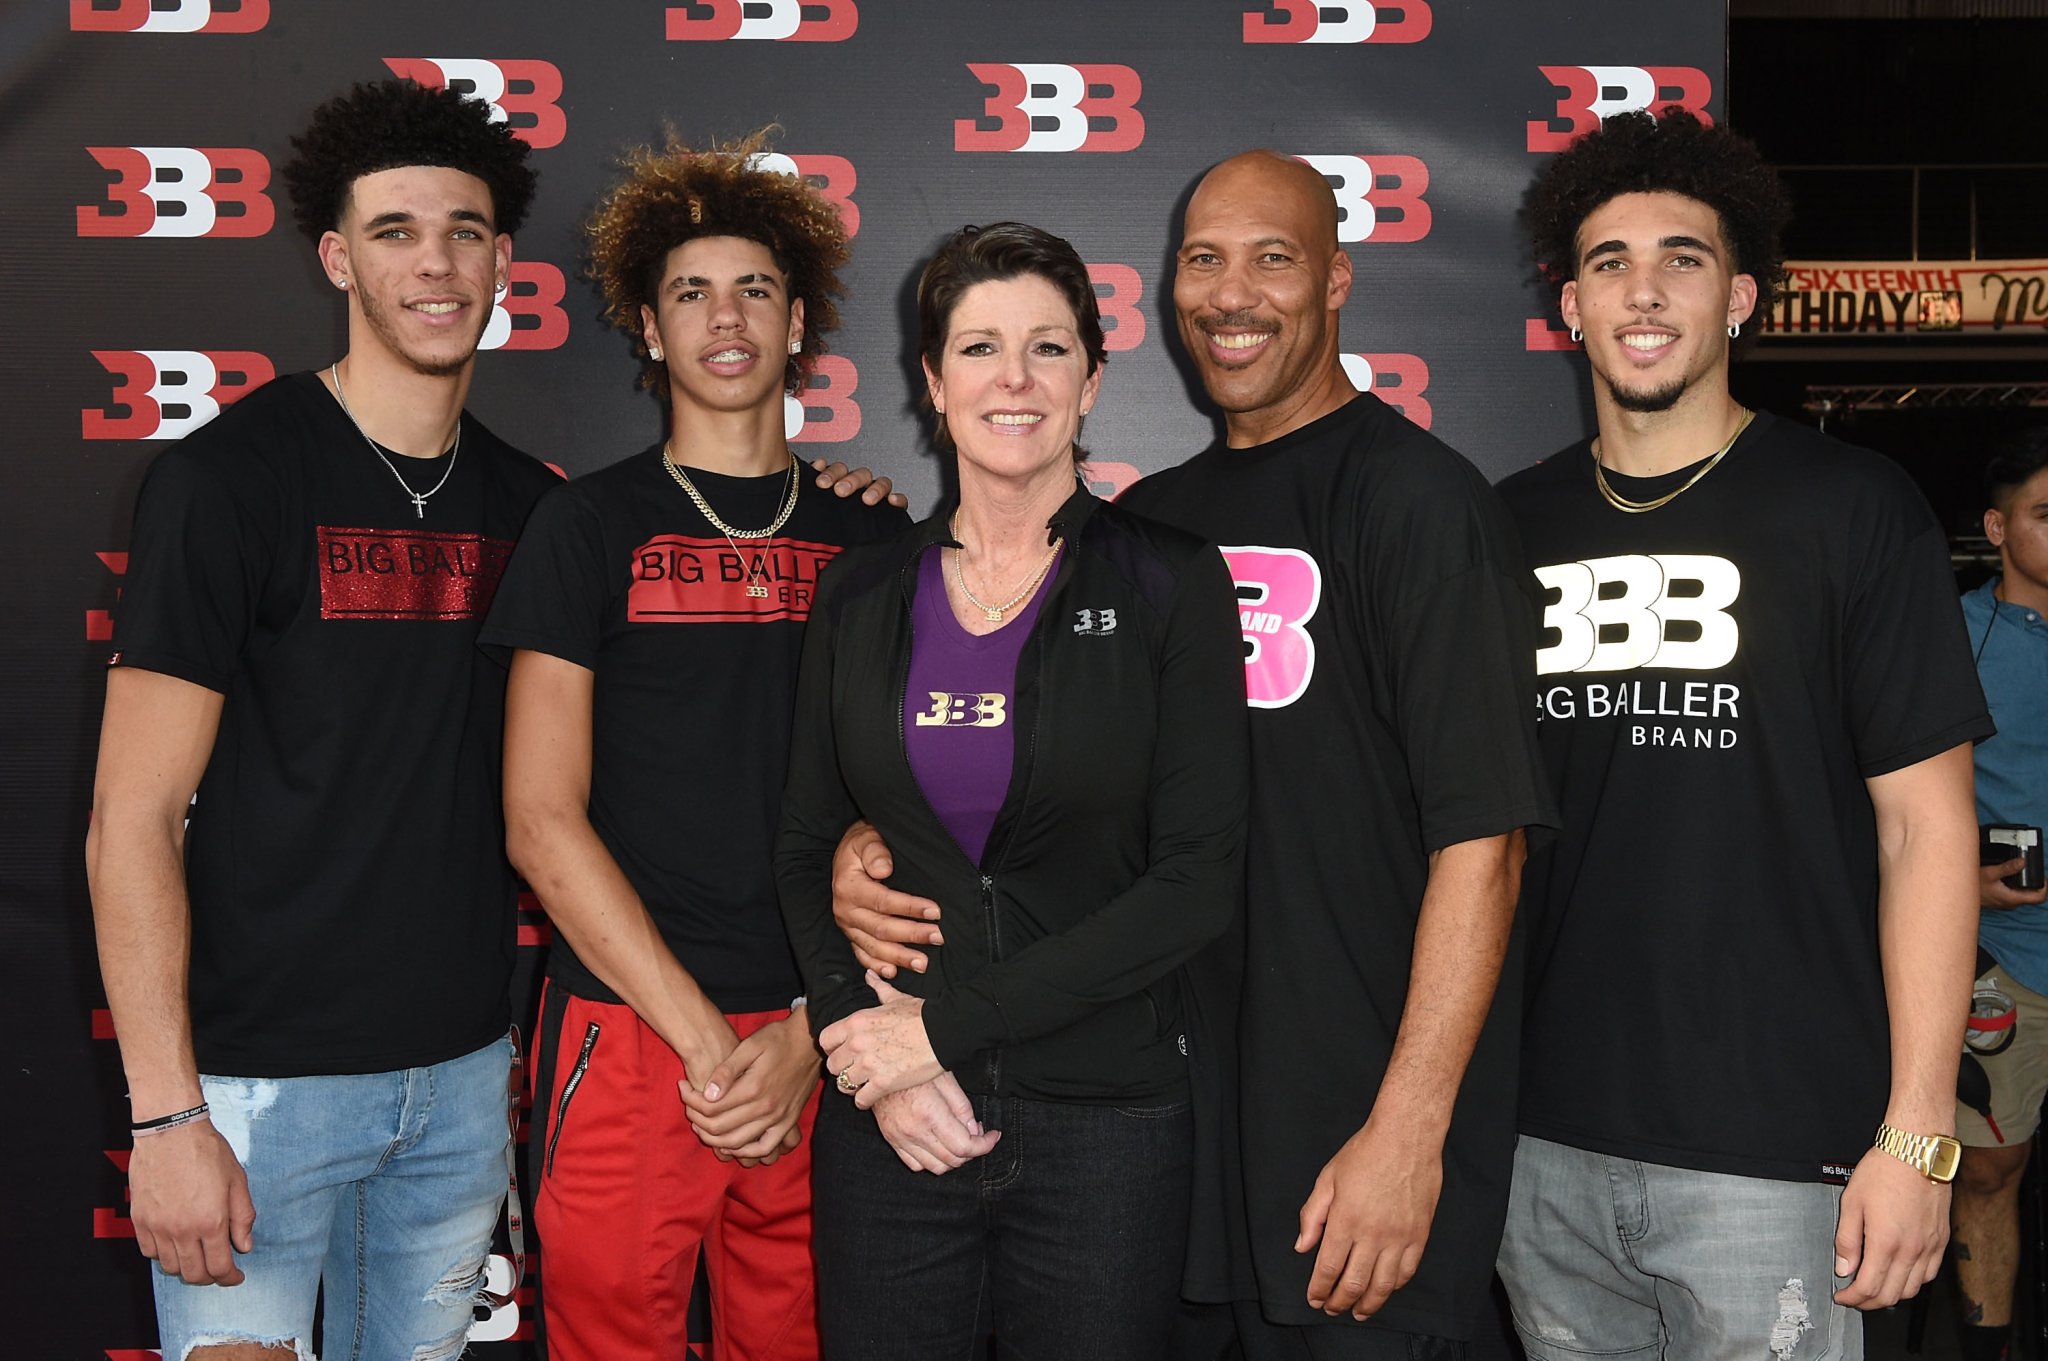 I Can't Stop Thinking About LaVar Ball's Bizarre Potty Training Regiment He Implemented To Ensure His Boys Were Skidmark-Free By 10 Months